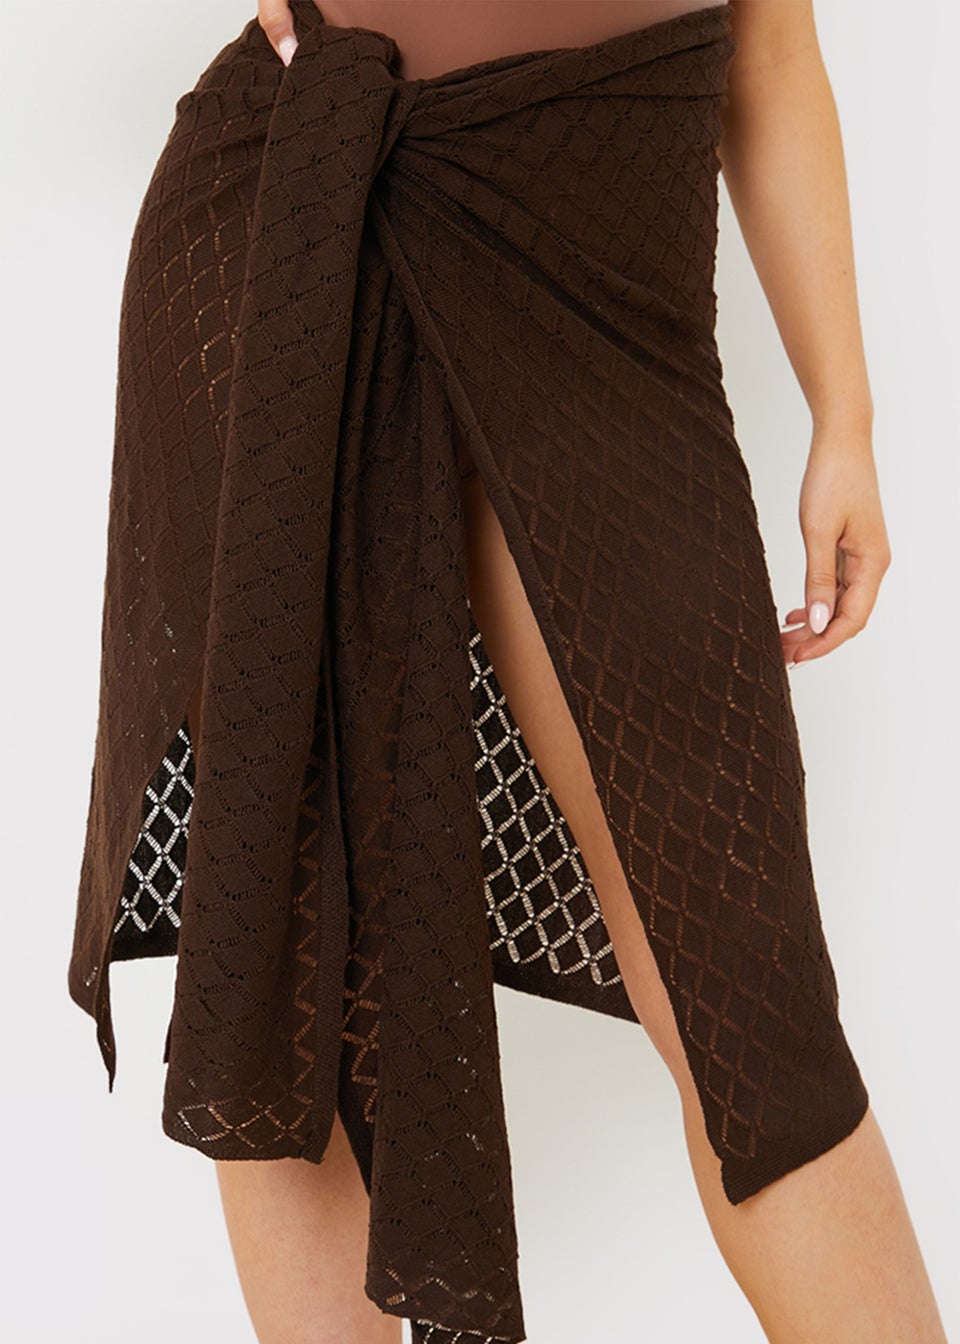 In The Style Chocolate Crochet Sarong